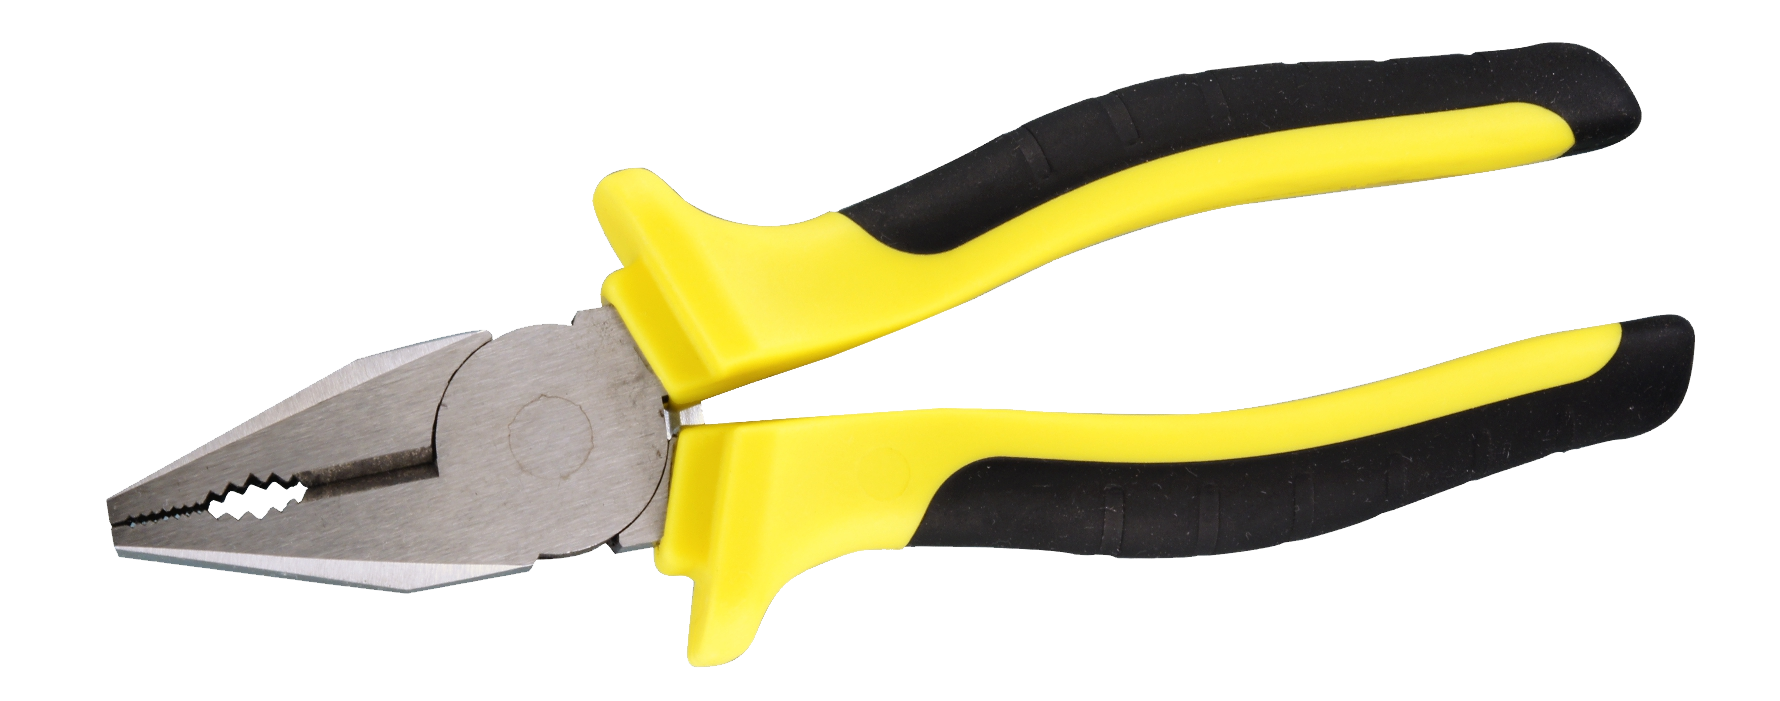 Black and Yellow Plier PNG Image in Transparent pngteam.com